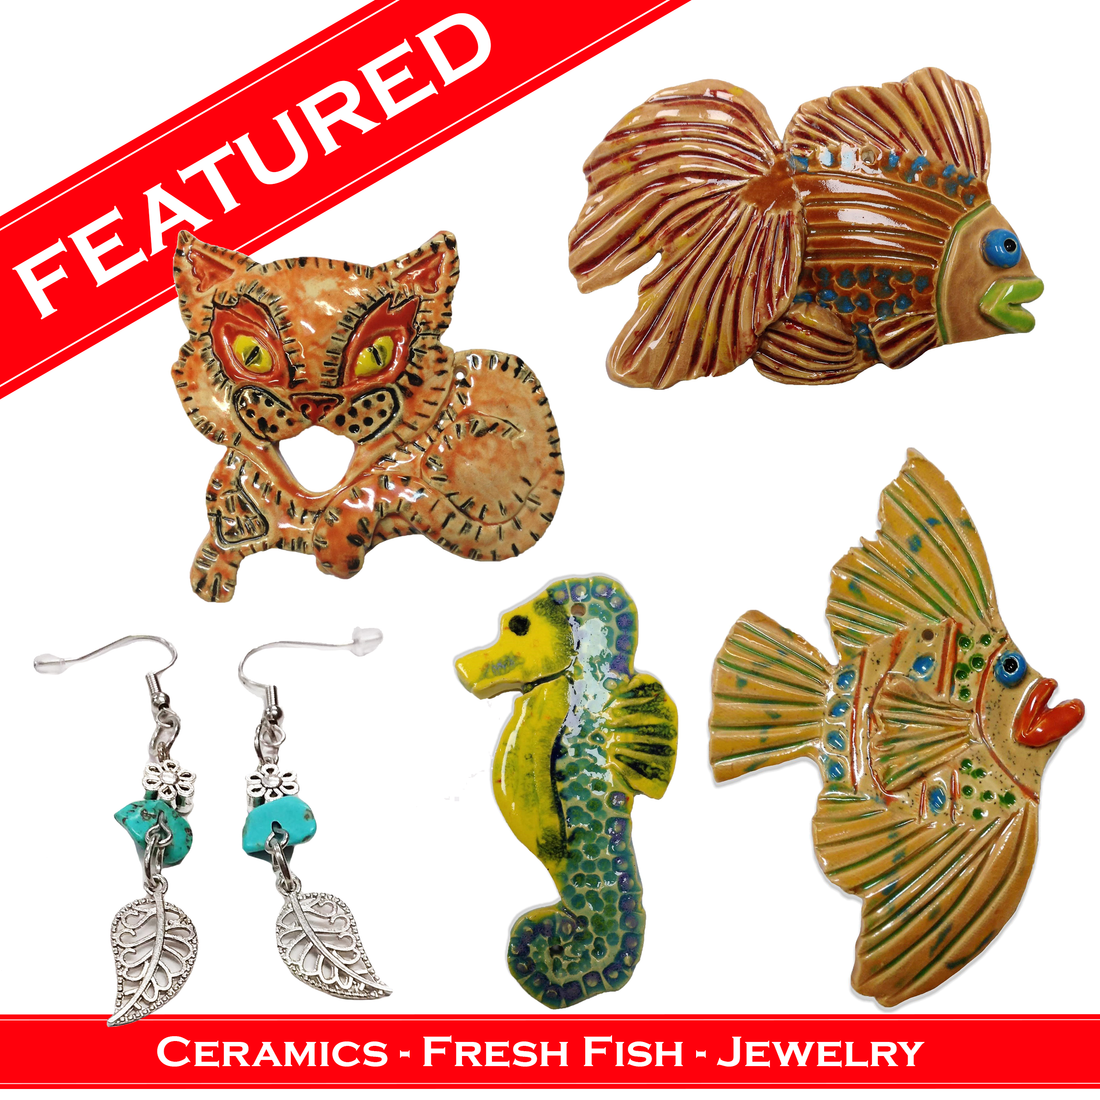 WATCH Resources Art Guild - September 2020 Features Ceramics, Fresh Fish, and Jewelry